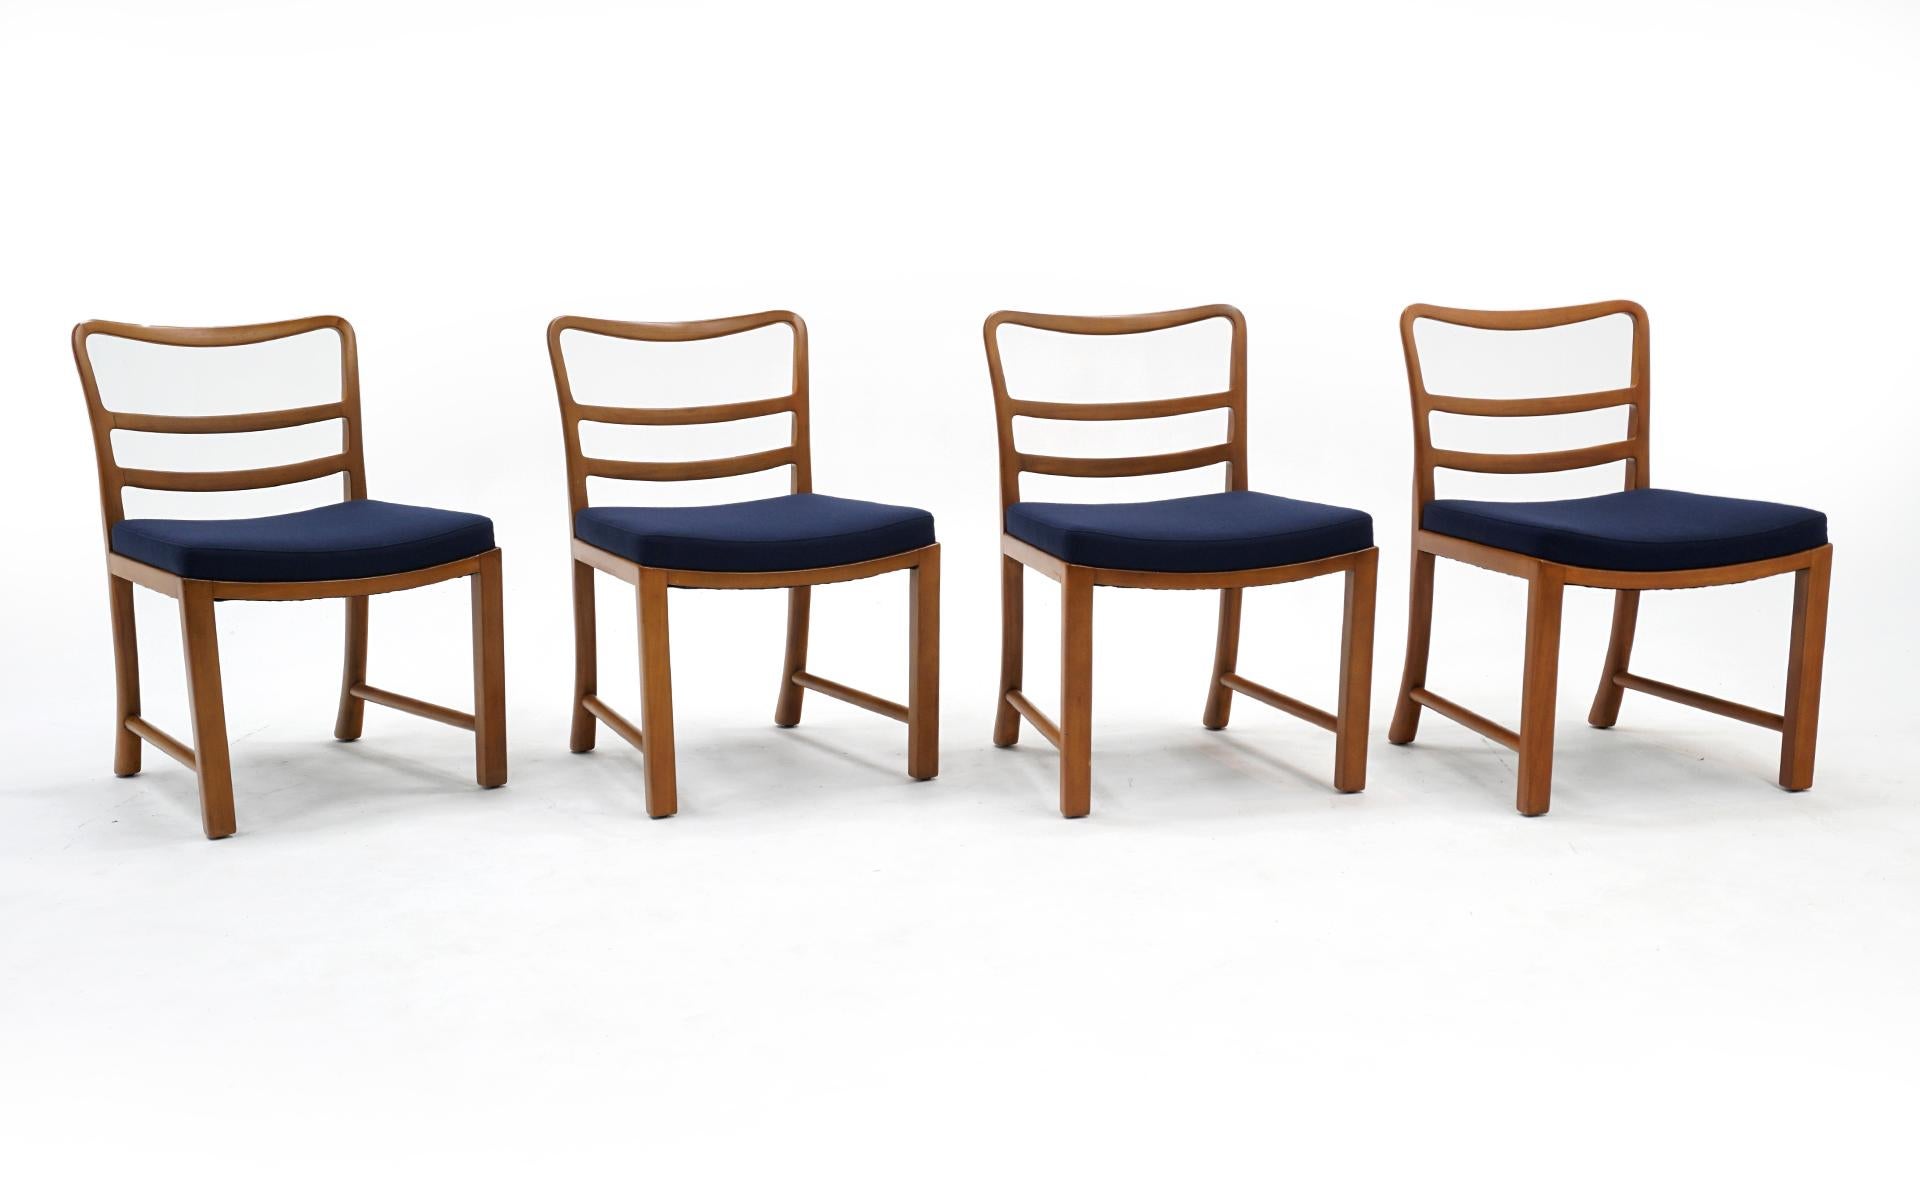 Set of four dining chairs designed by Edward Wormley for Dunbar. Bleached mahogany frames and blue upholstery.